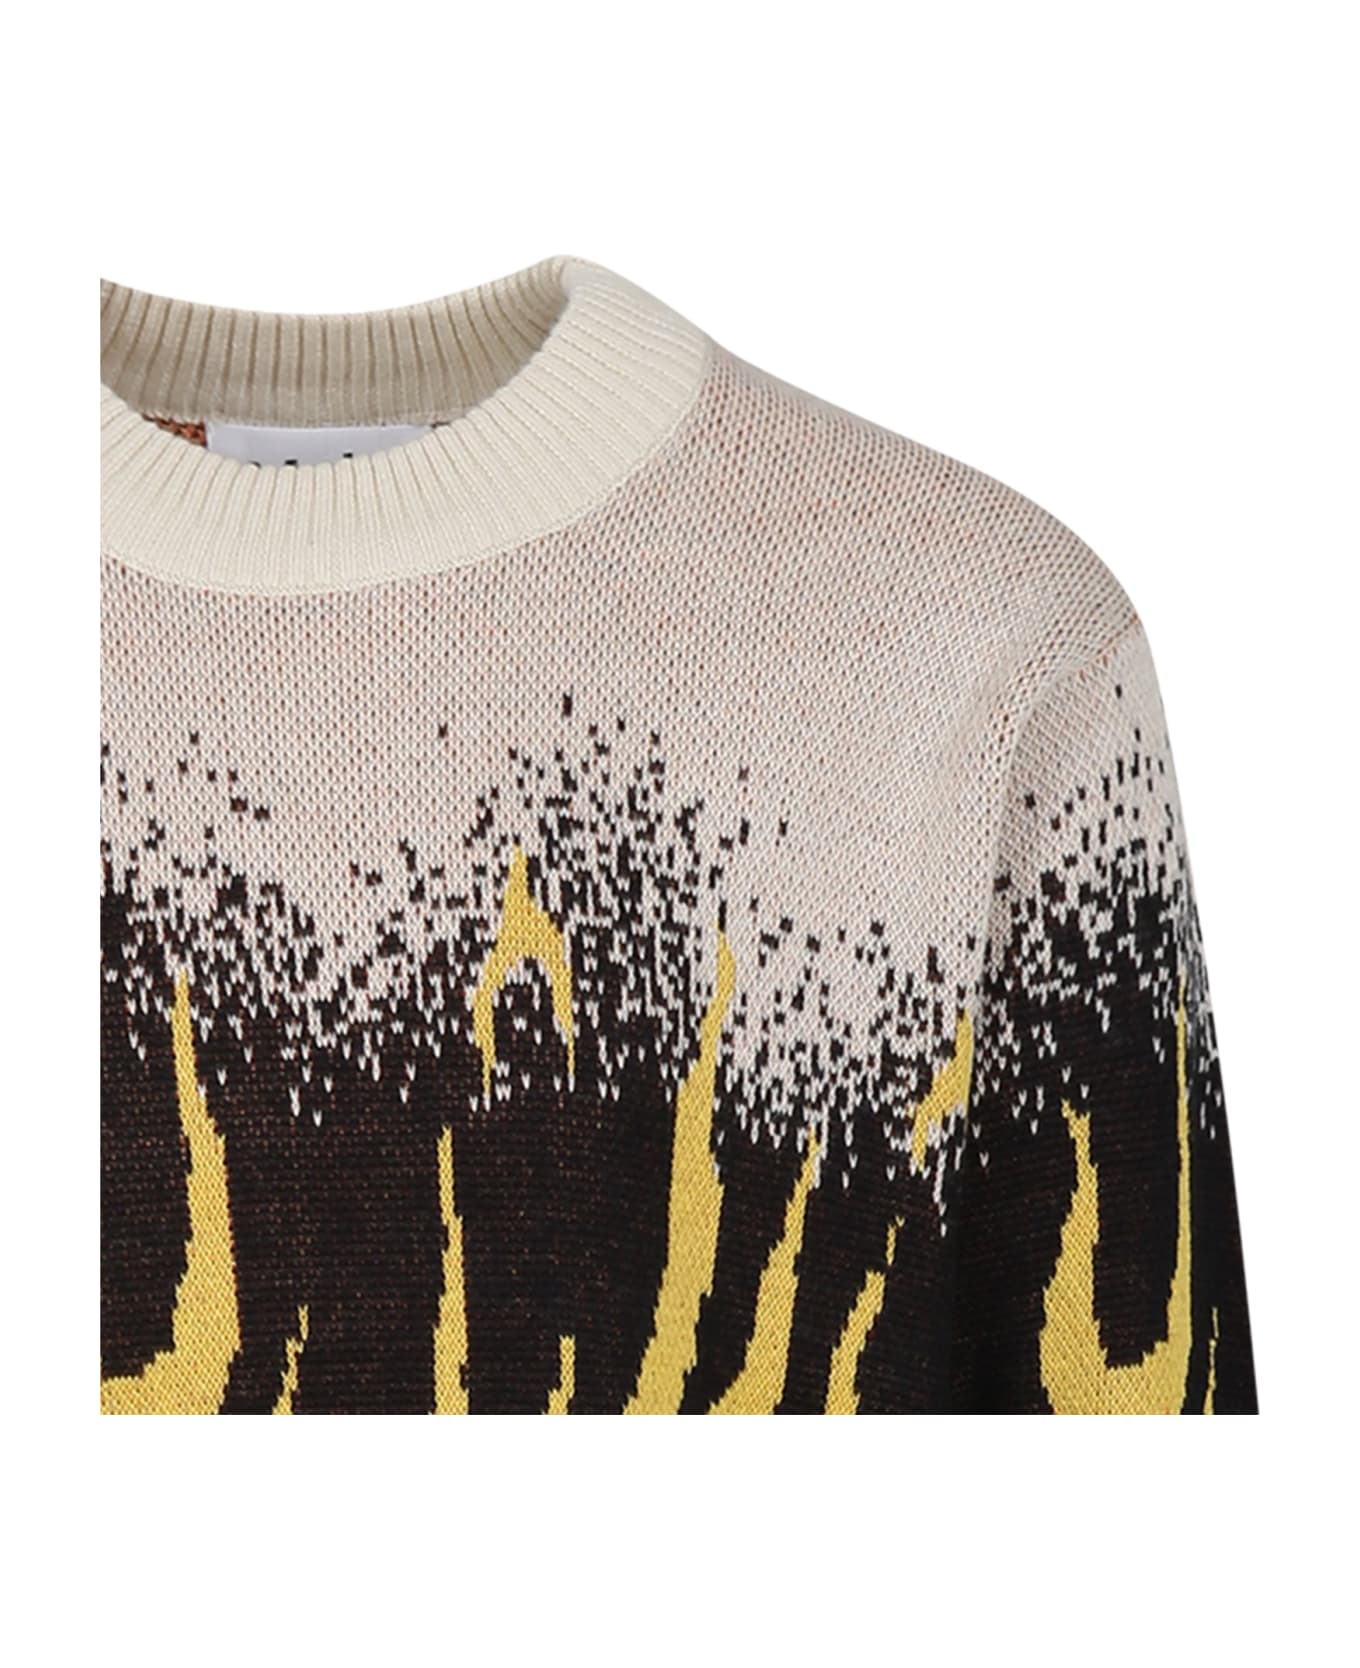 Molo Beige Sweater For Boy With Flames - Multicolor ニットウェア＆スウェットシャツ